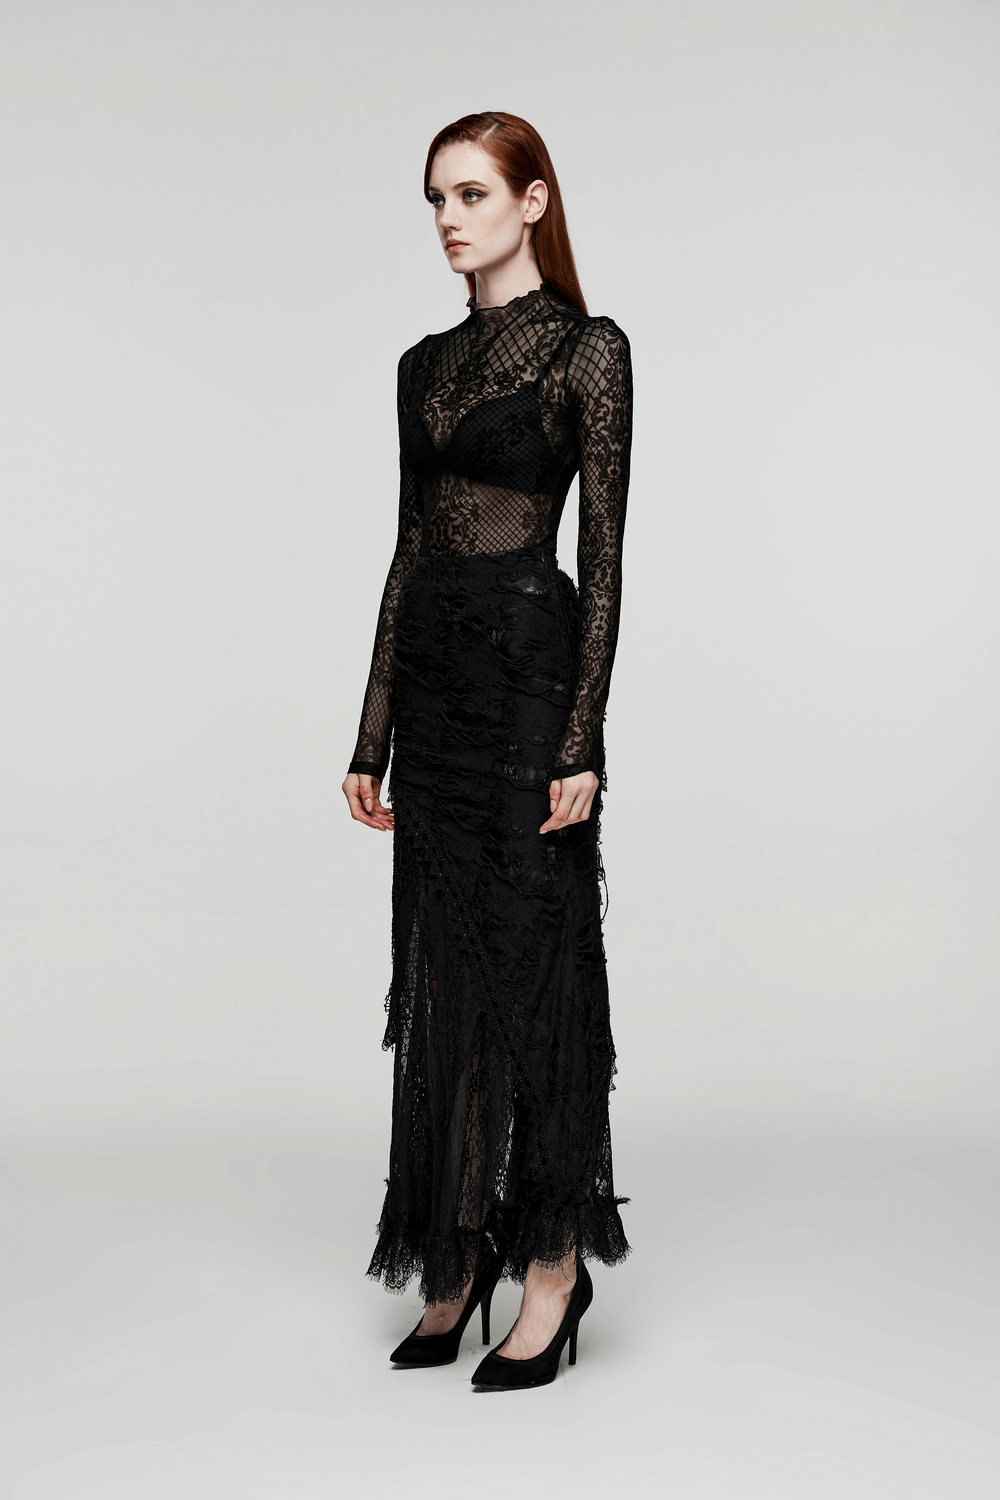 Asymmetric Ripped Mesh and Lace Long Skirt for Women